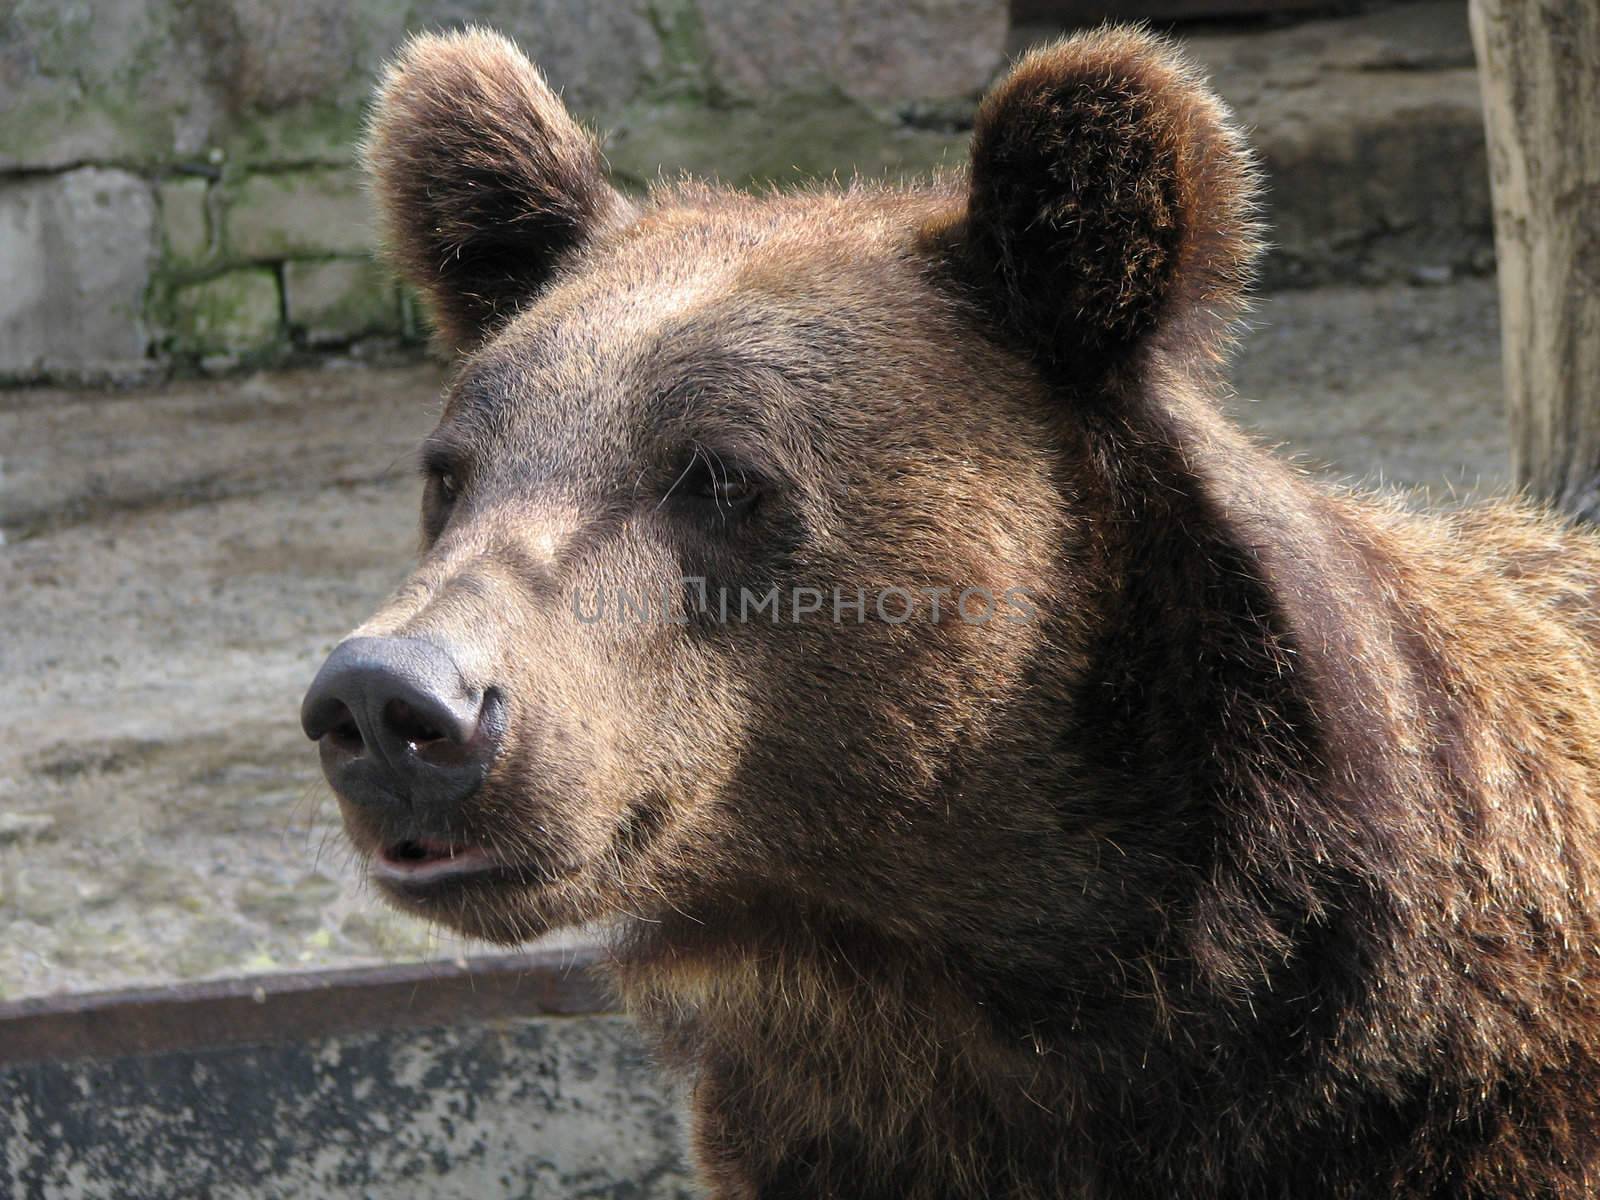 The brown bear by drpa_yay